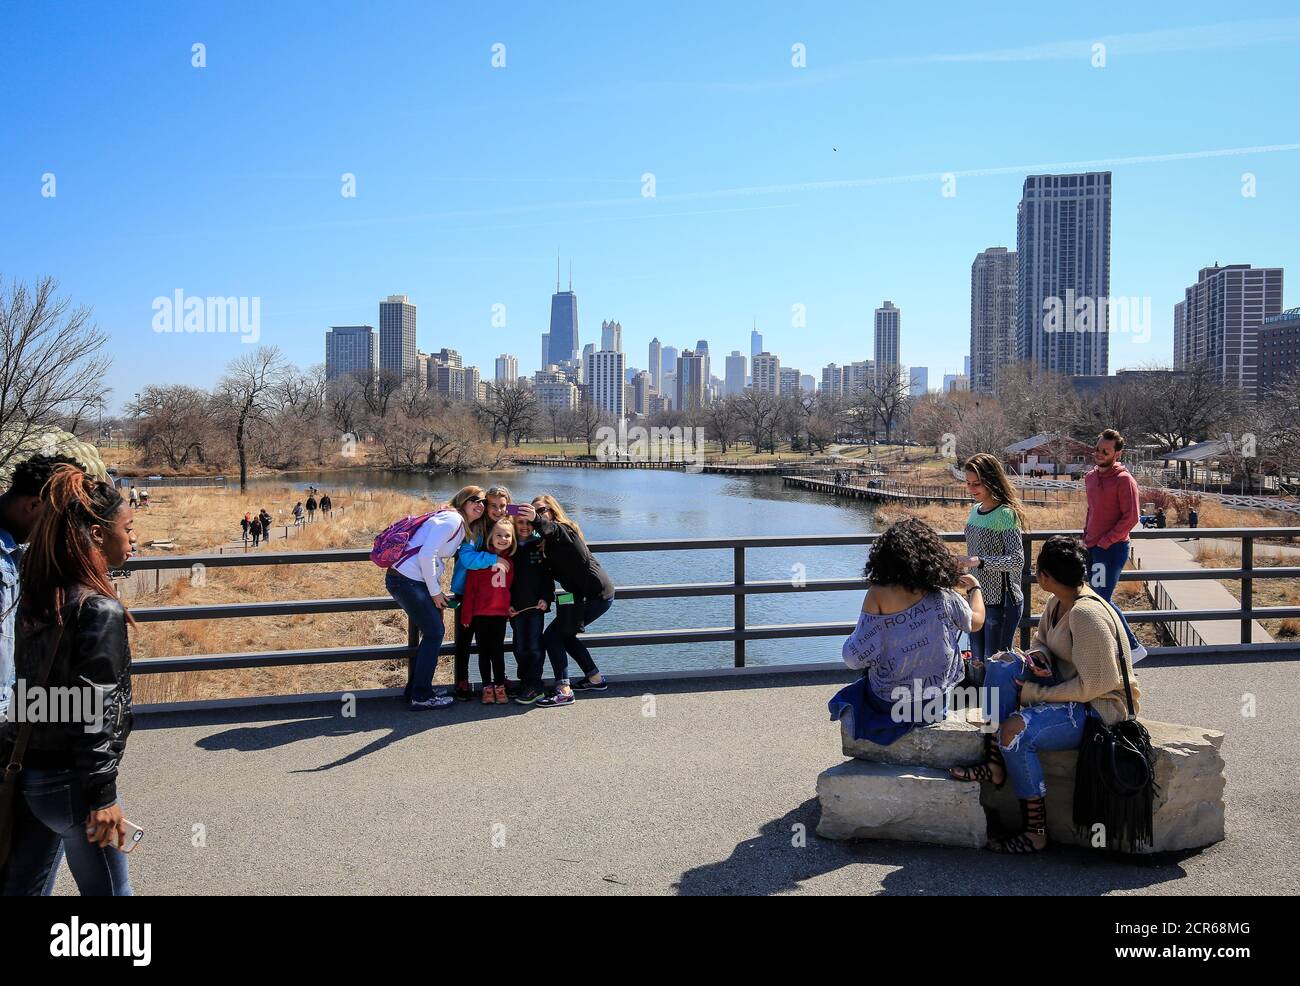 Street scene at Lincoln Park Zoo in front of Chicago skyline, Chicago, Illinois, USA, North America Stock Photo